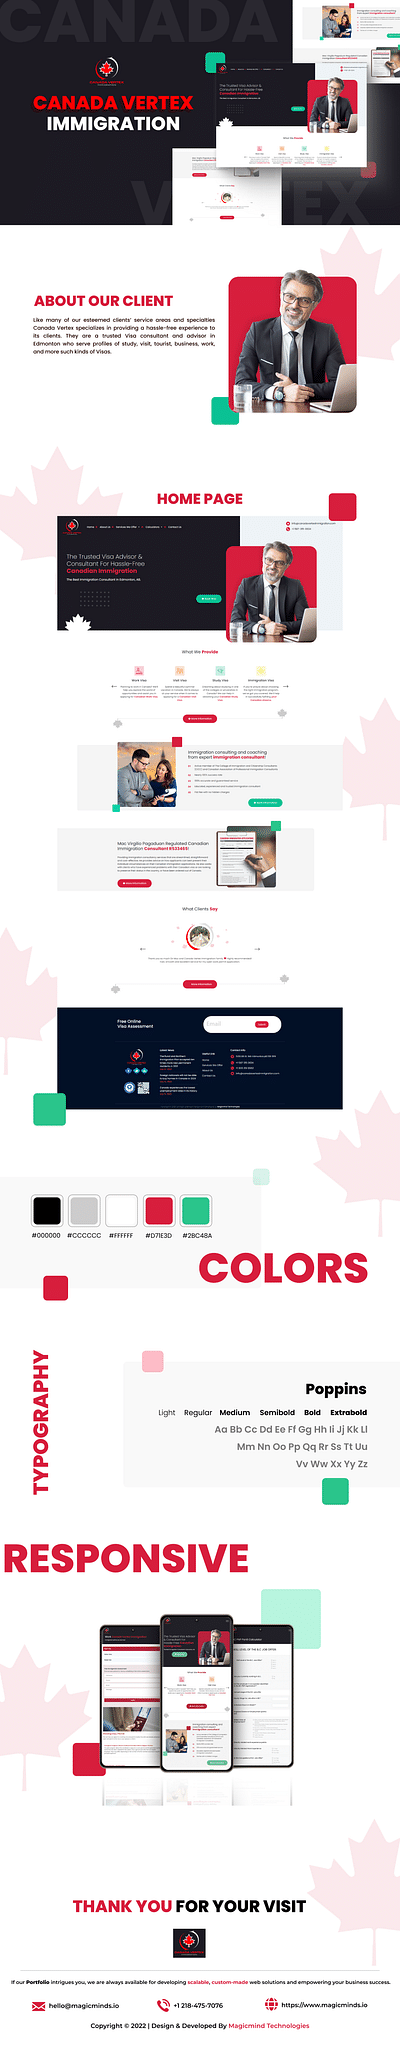 Canada Vertex: Website for Immigration Consultants - Application web